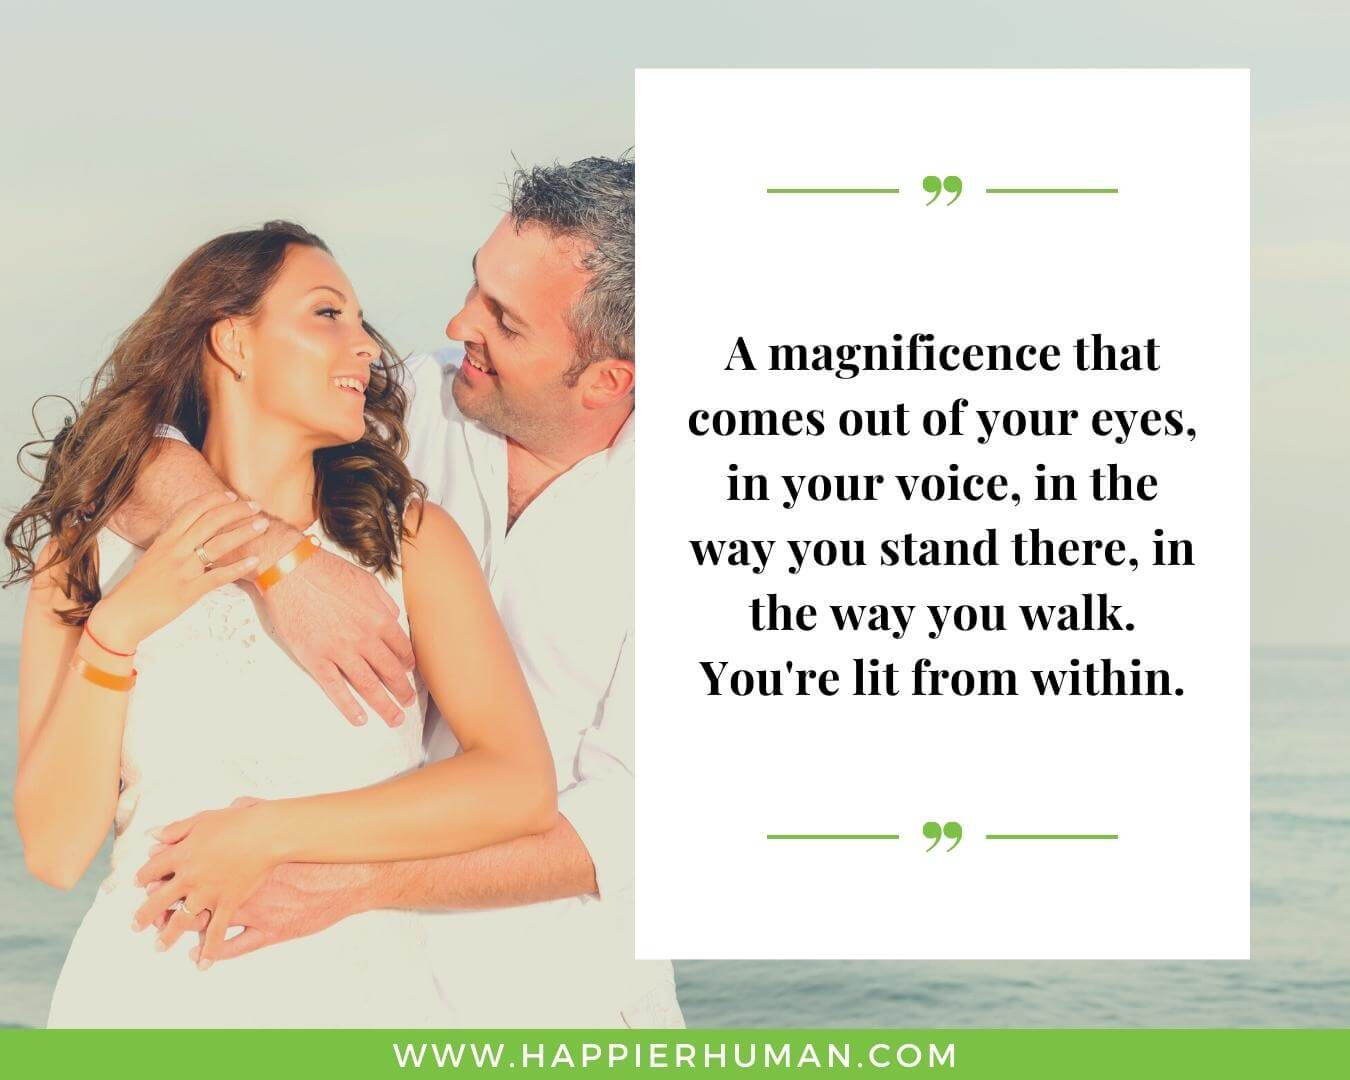 Unconditional Love Quotes for Her - “A magnificence that comes out of your eyes, in your voice, in the way you stand there, in the way you walk. You're lit from within.”